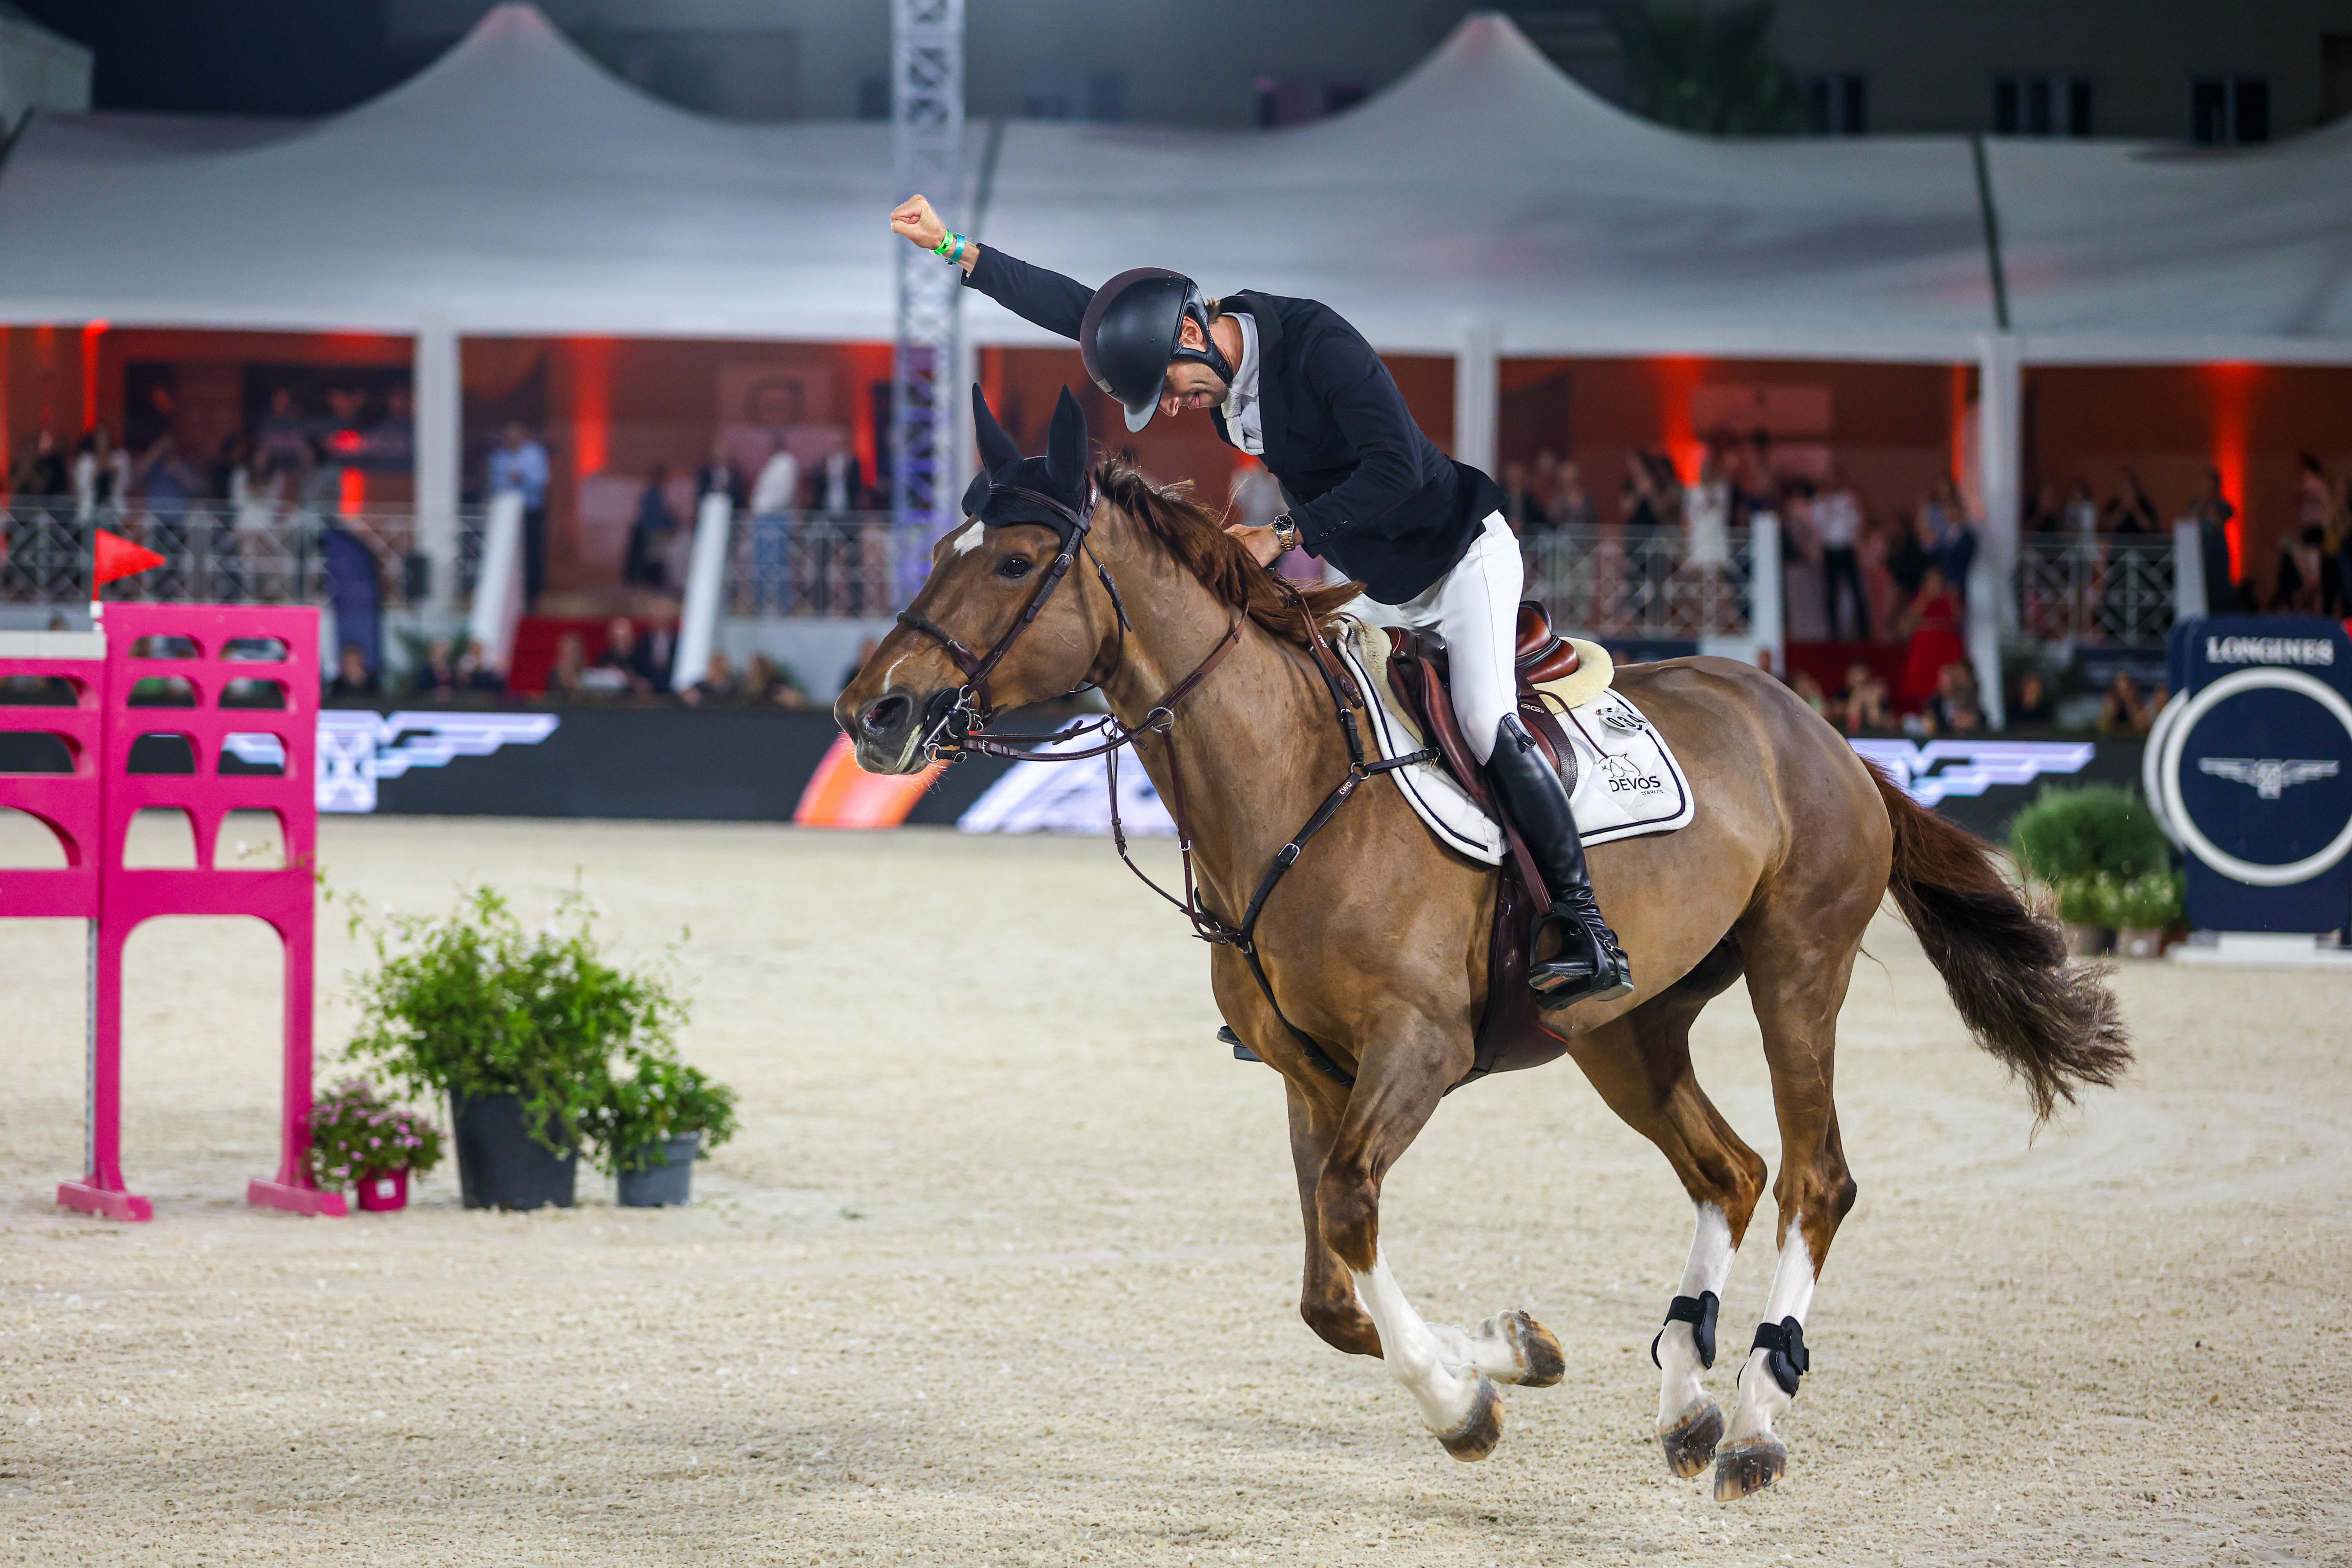 Pieter Devos: "Winning should not come at the expense of the horse!"